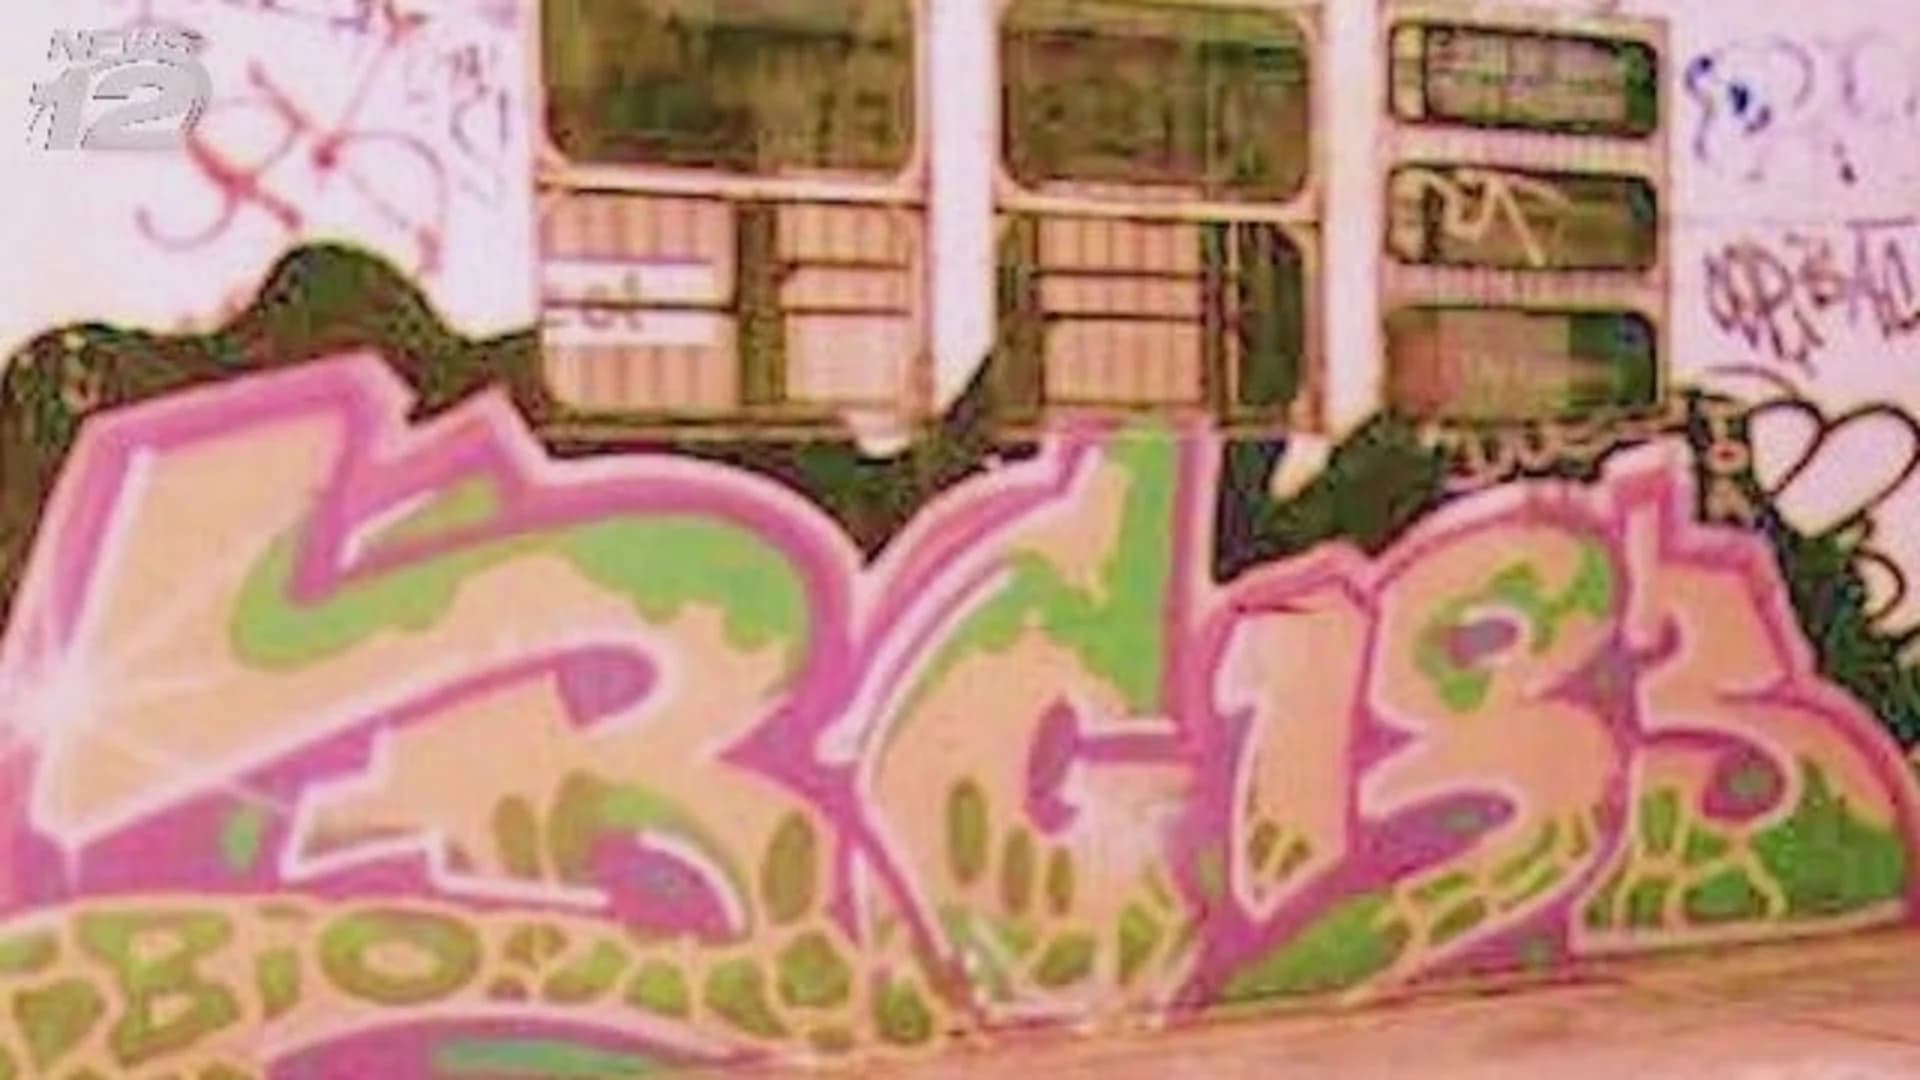 Graffiti artists leave their mark on NYC culture